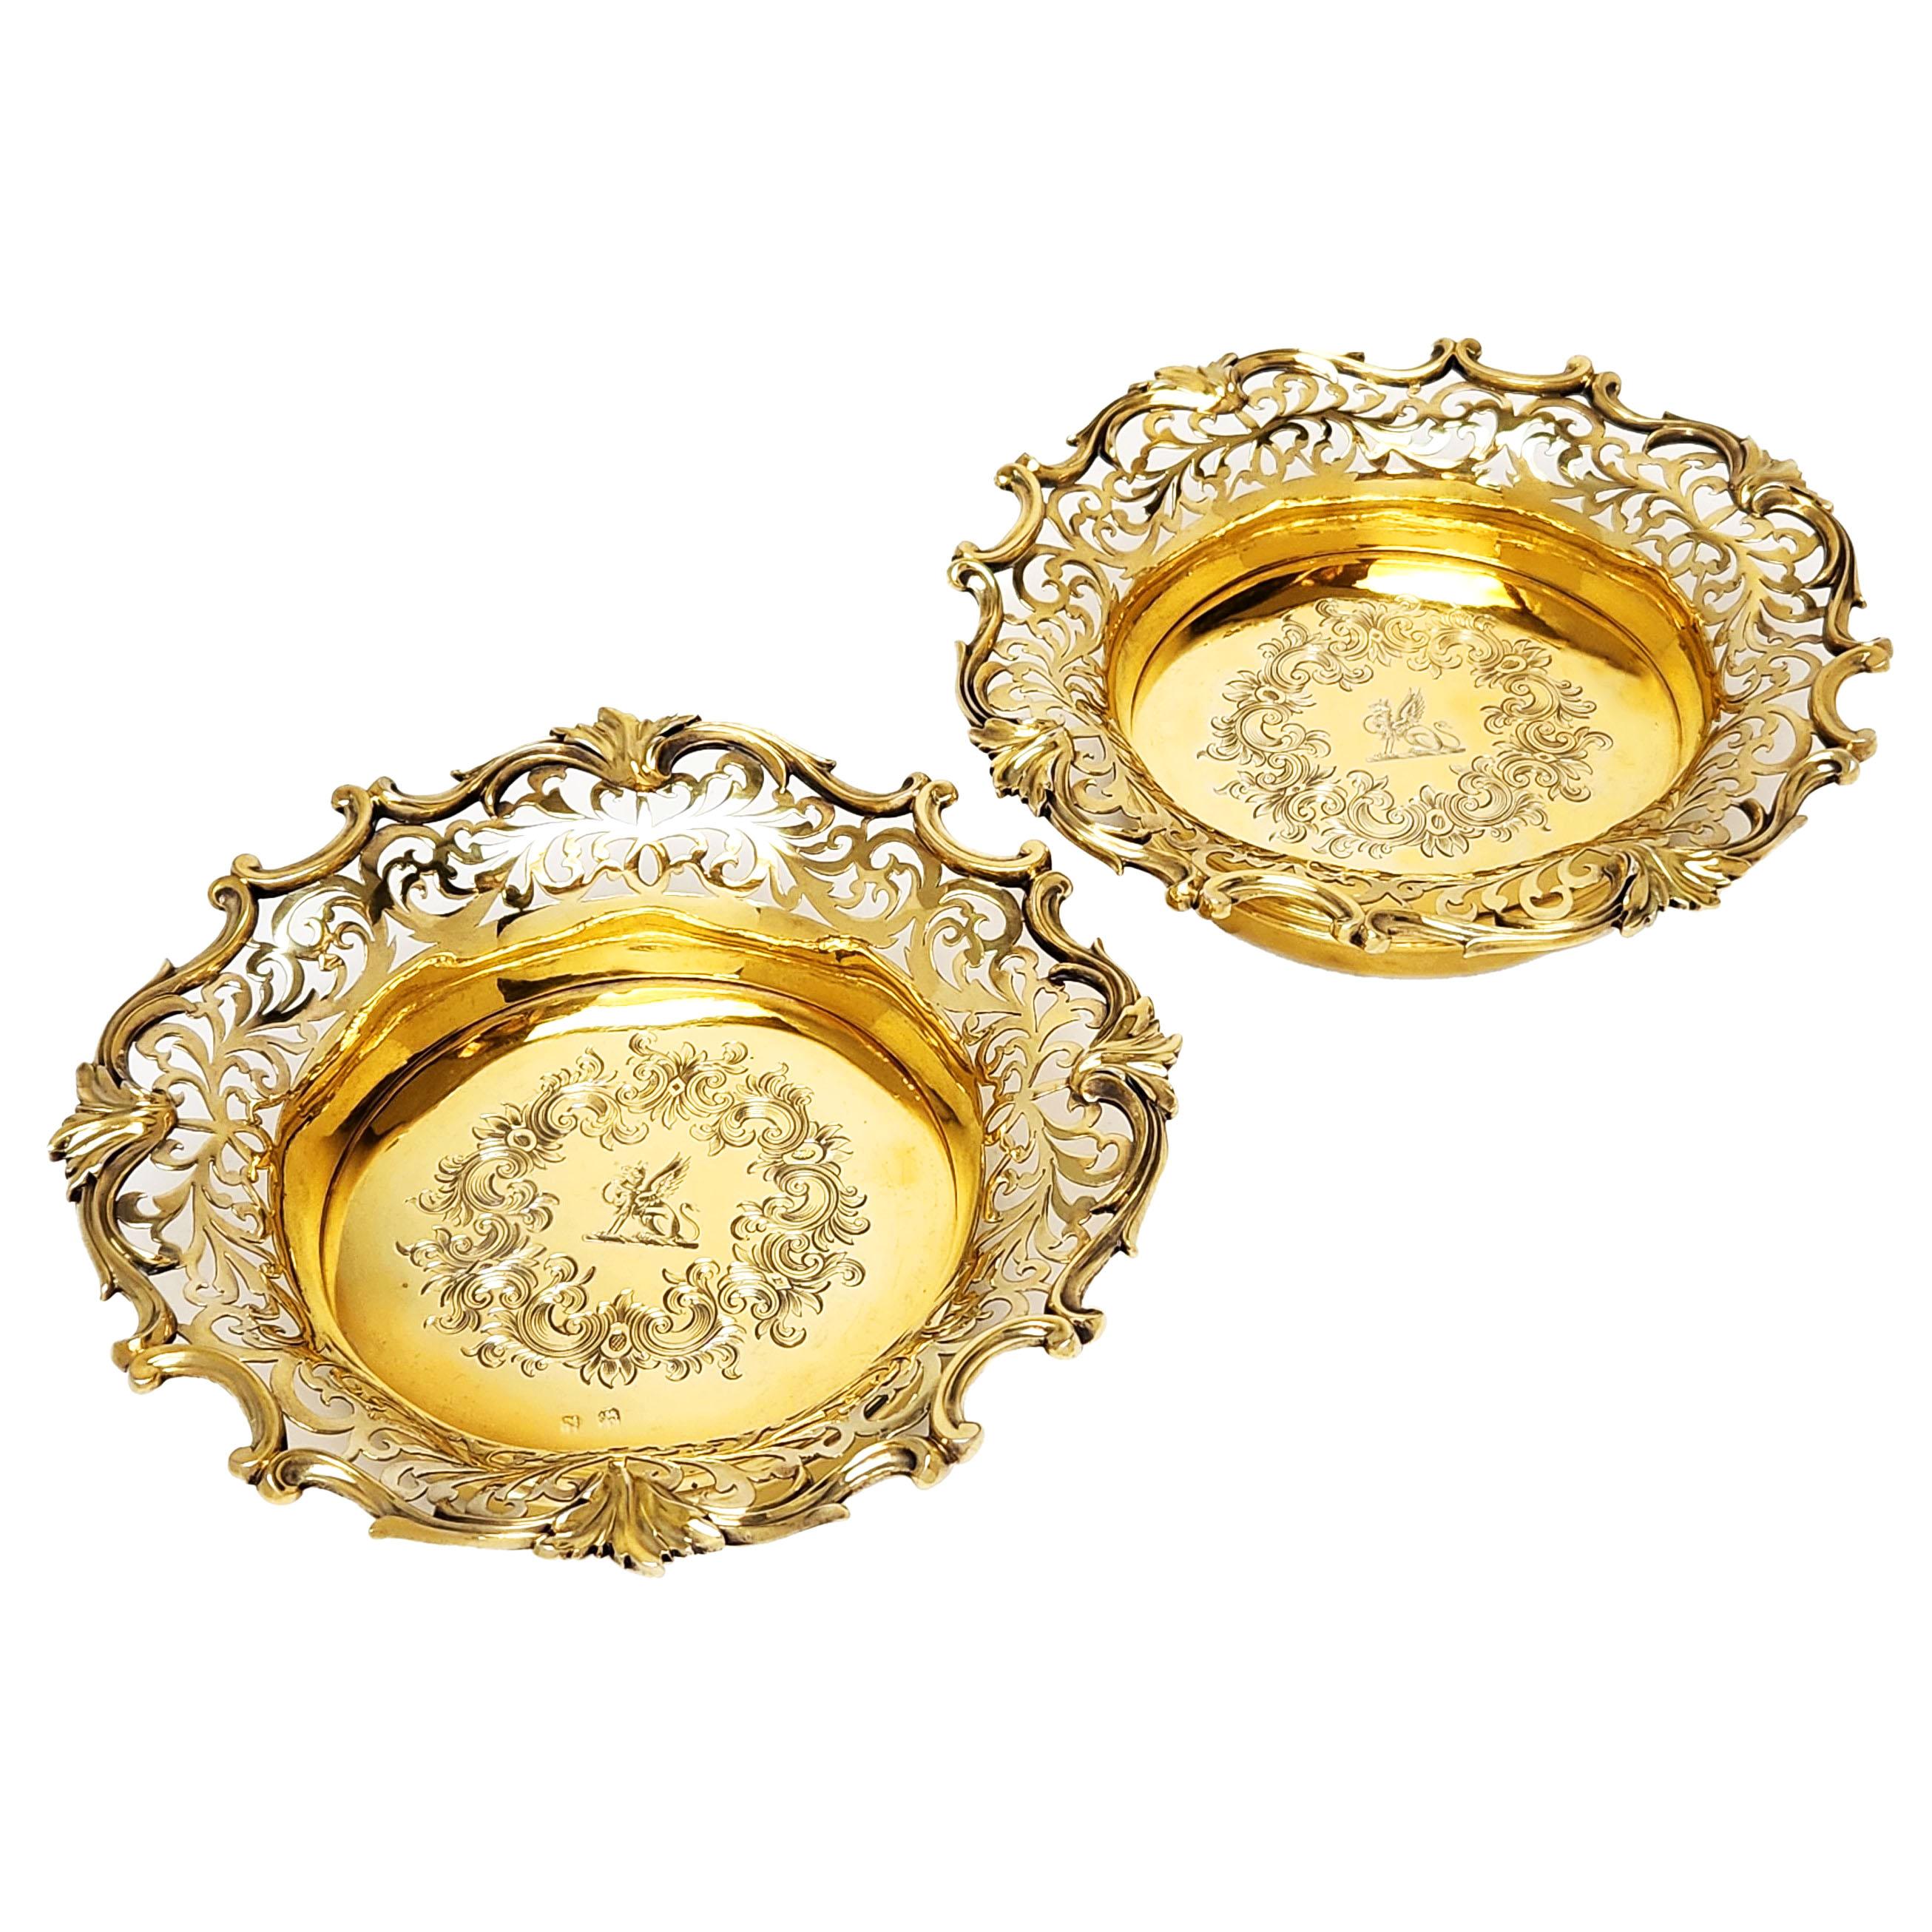 A pair of beautiful Antique Solid Silver Wine Bottle Coasters with an elegant gilded finish. The coasters have and ornate pierced design on the sides and a leaf and scroll boarder on the rim. The gilded silver base of each of the Wine Coasters are